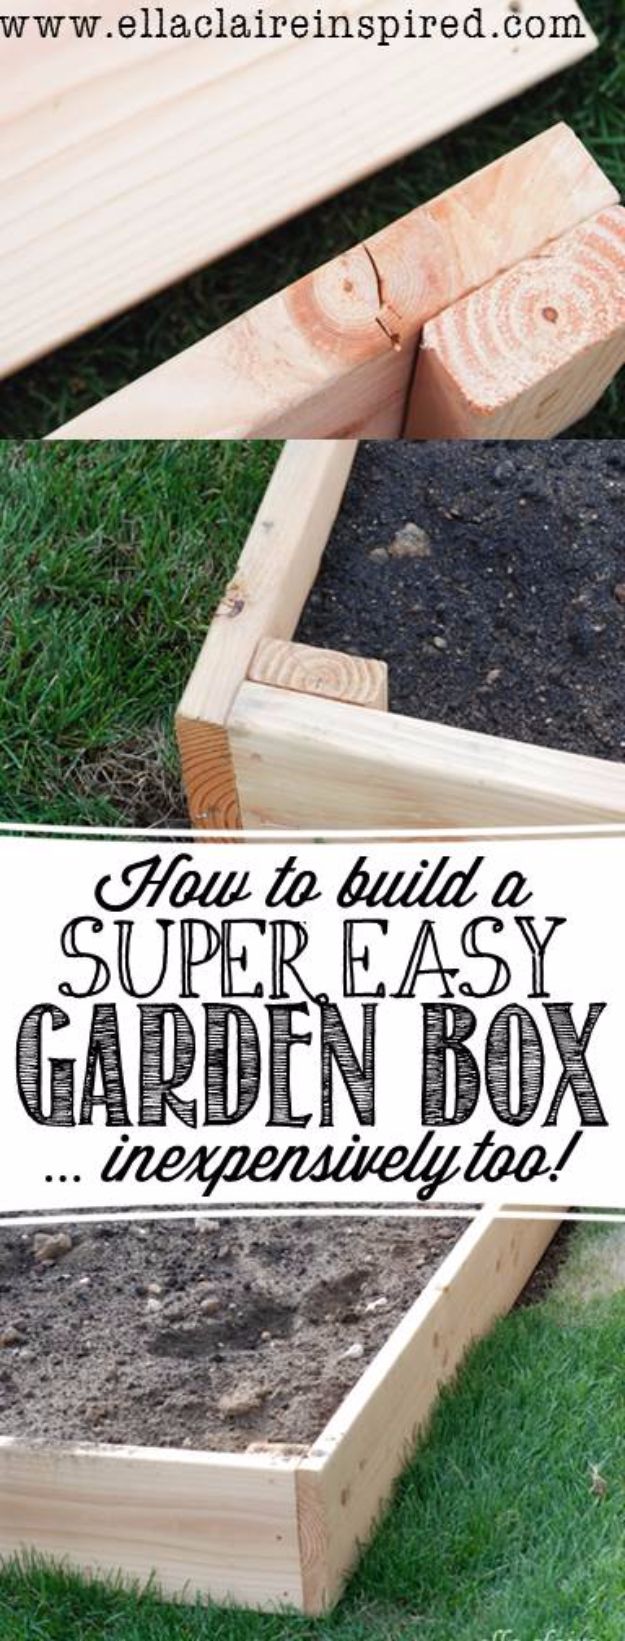 DIY Garden Beds - Super Easy Garden Box - Easy Gardening Ideas for Raised Beds and Planter Boxes - Free Plans, Tutorials and Step by Step Tutorials for Building and Landscaping Projects - Update Your Backyard and Gardens With These Cheap Do It Yourself Ideas http://diyjoy.com/diy-garden-beds